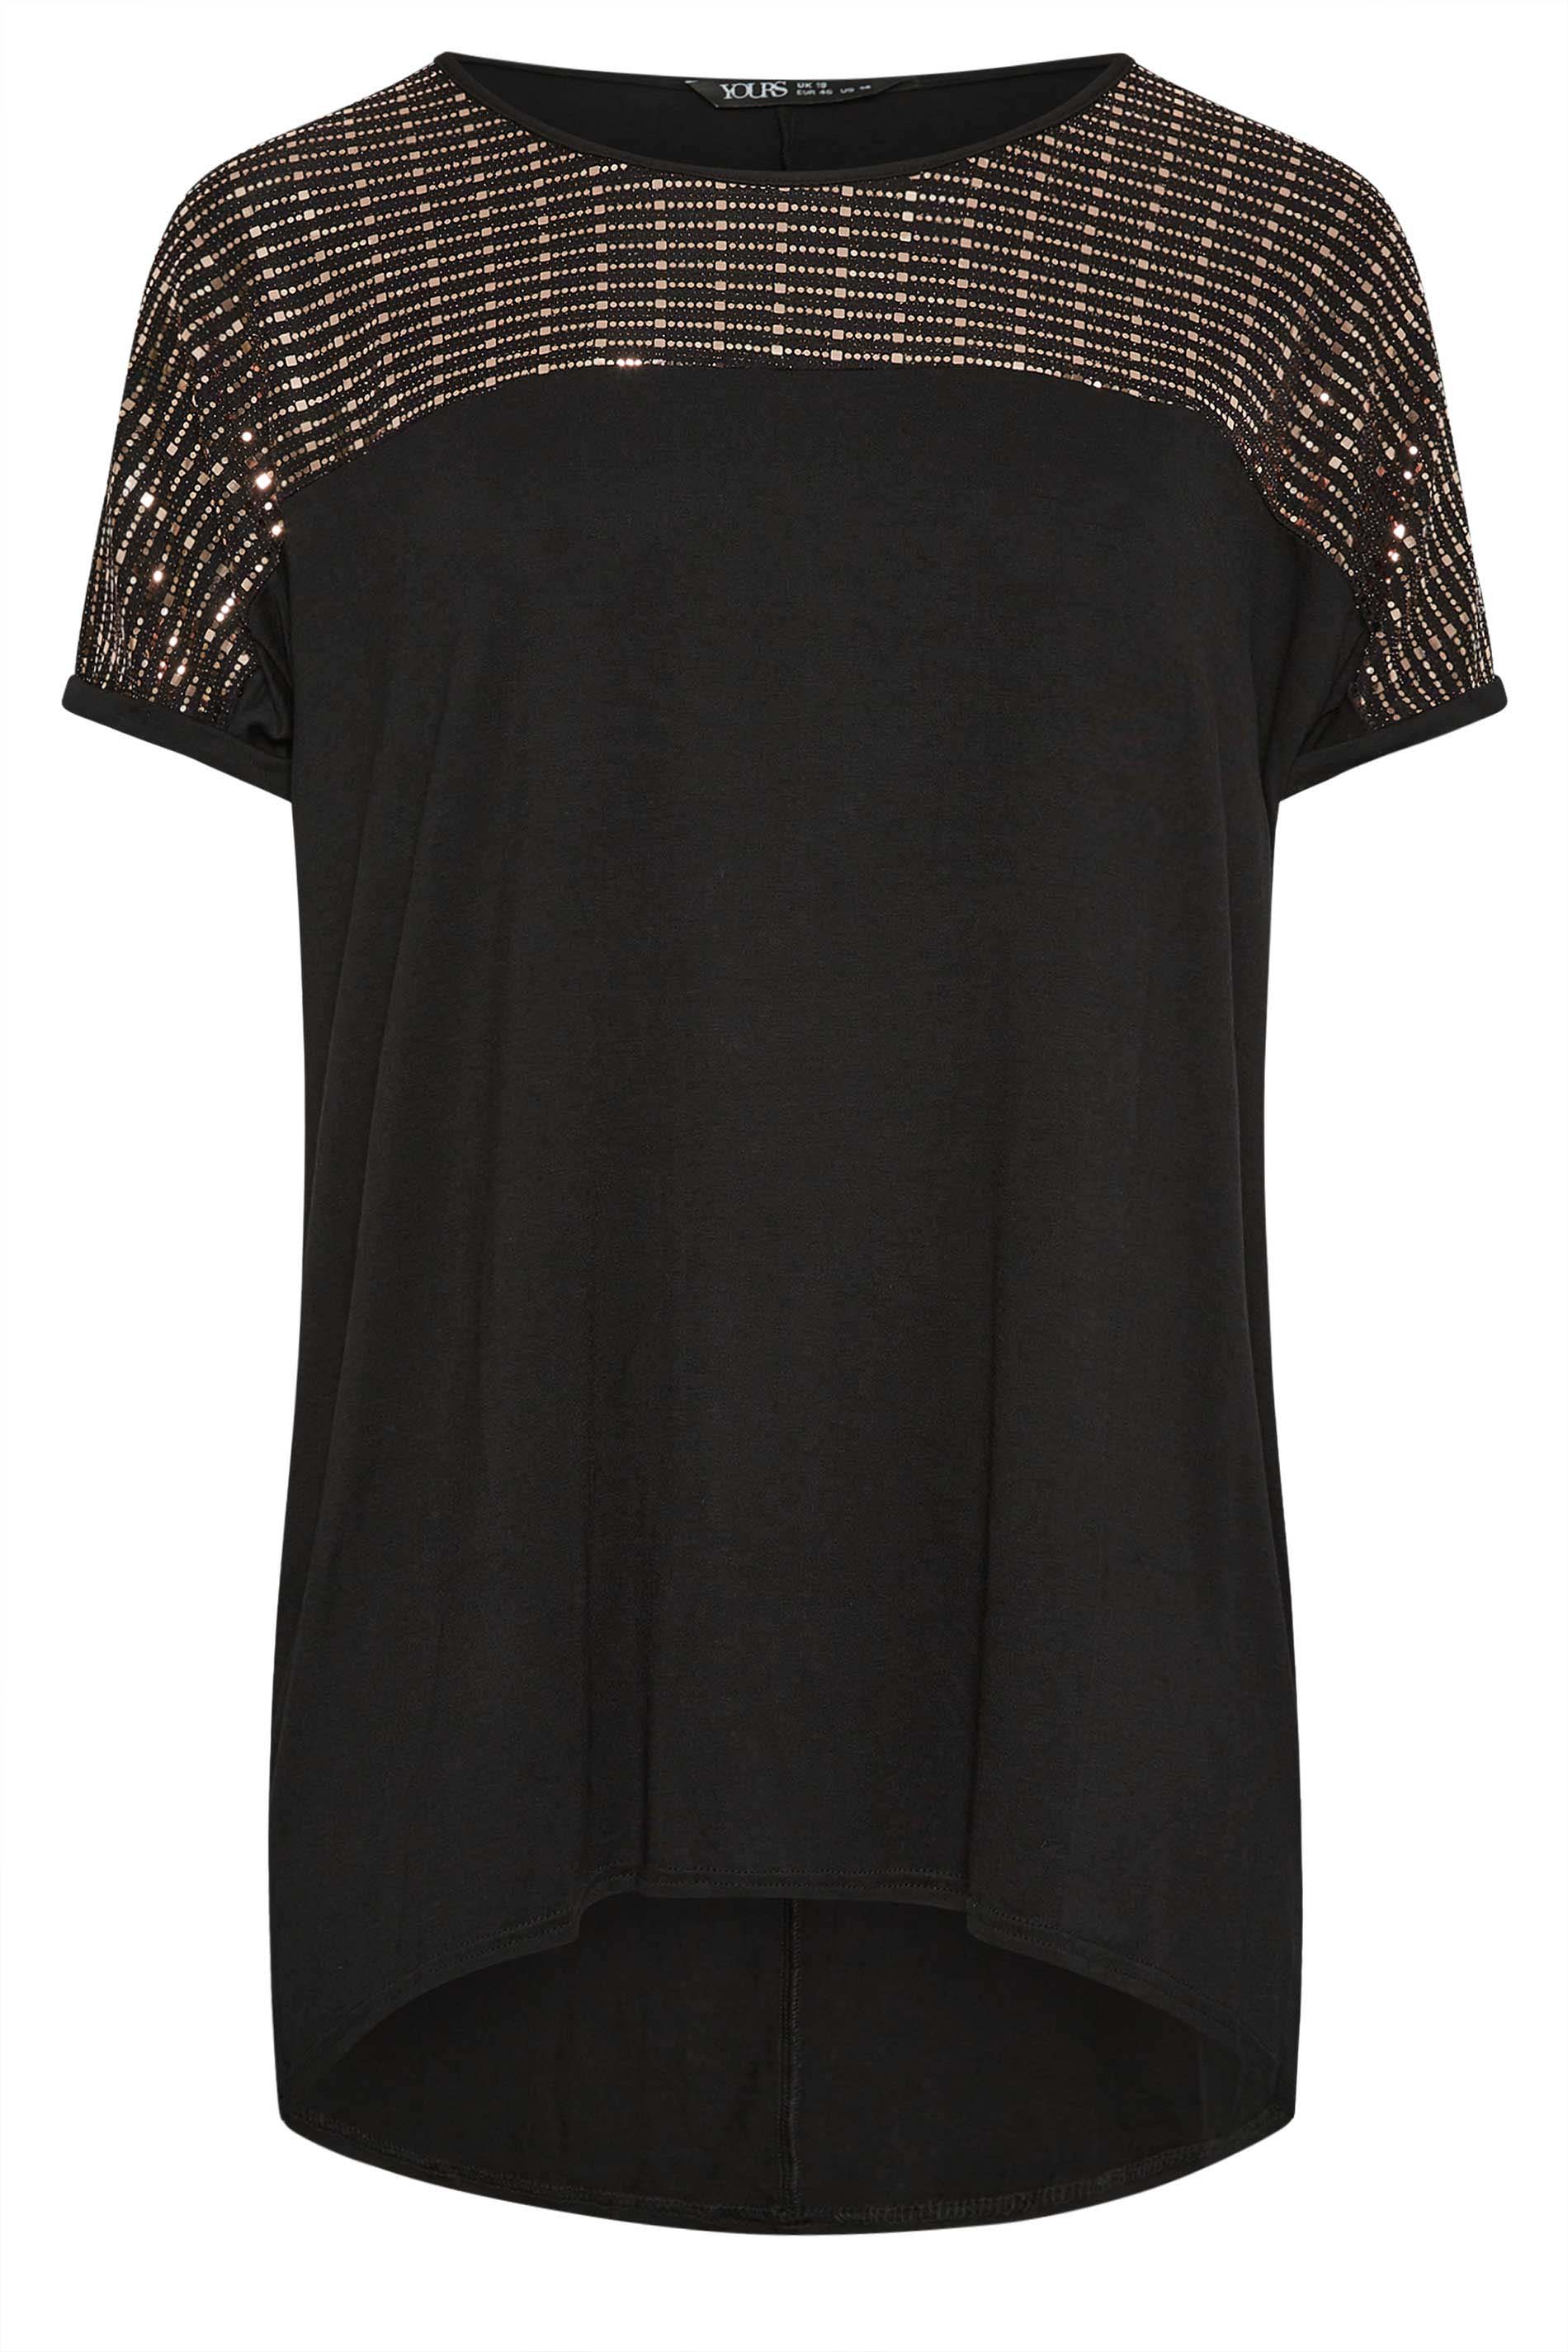 YOURS LONDON Plus Size Gold Sequin Embellished Shirt